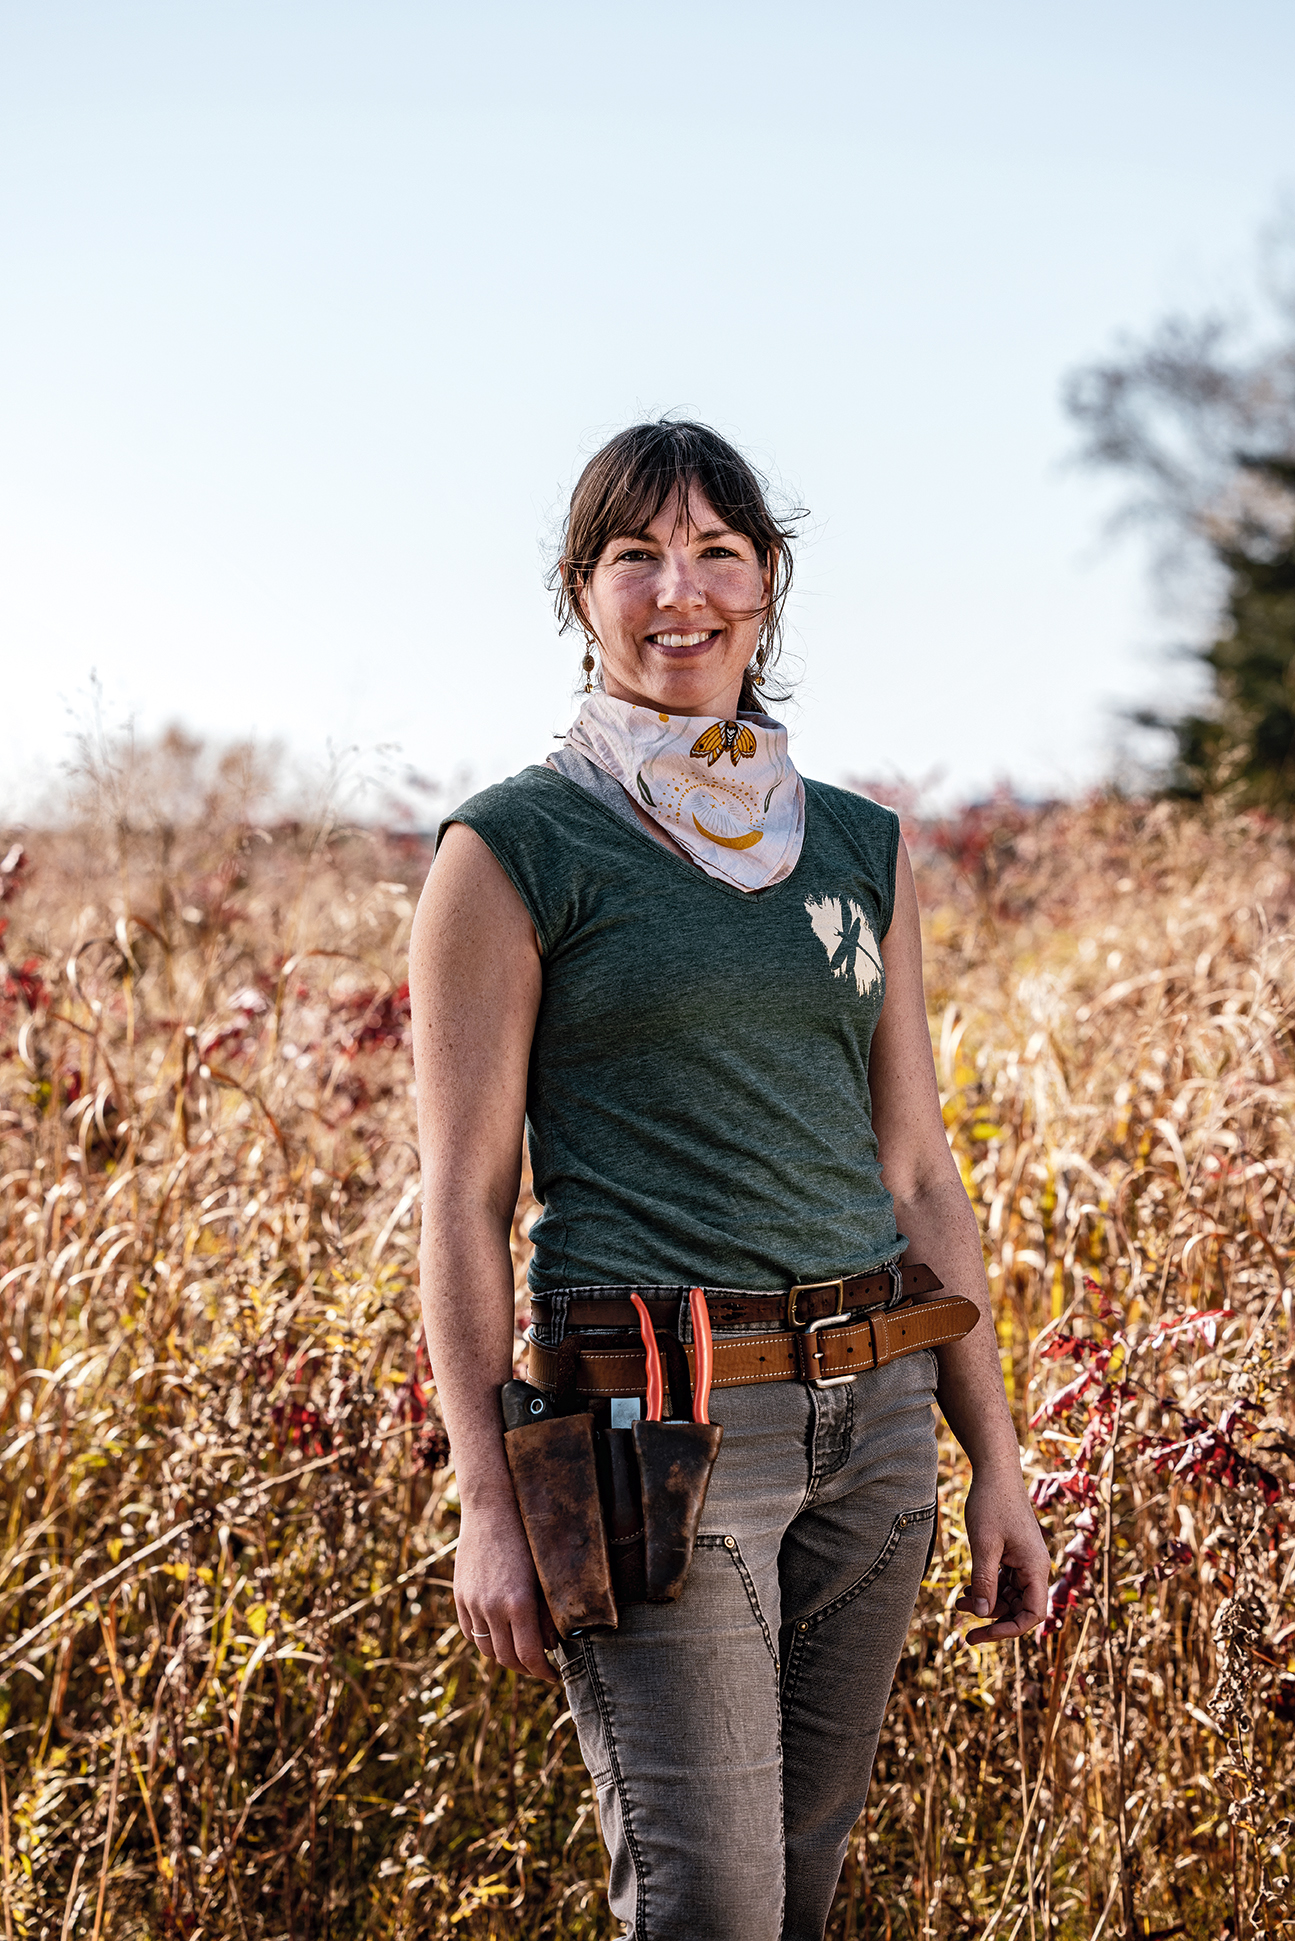  Meghan Gallagher of Wild and Scenic Fine Gardening and Horticulture.